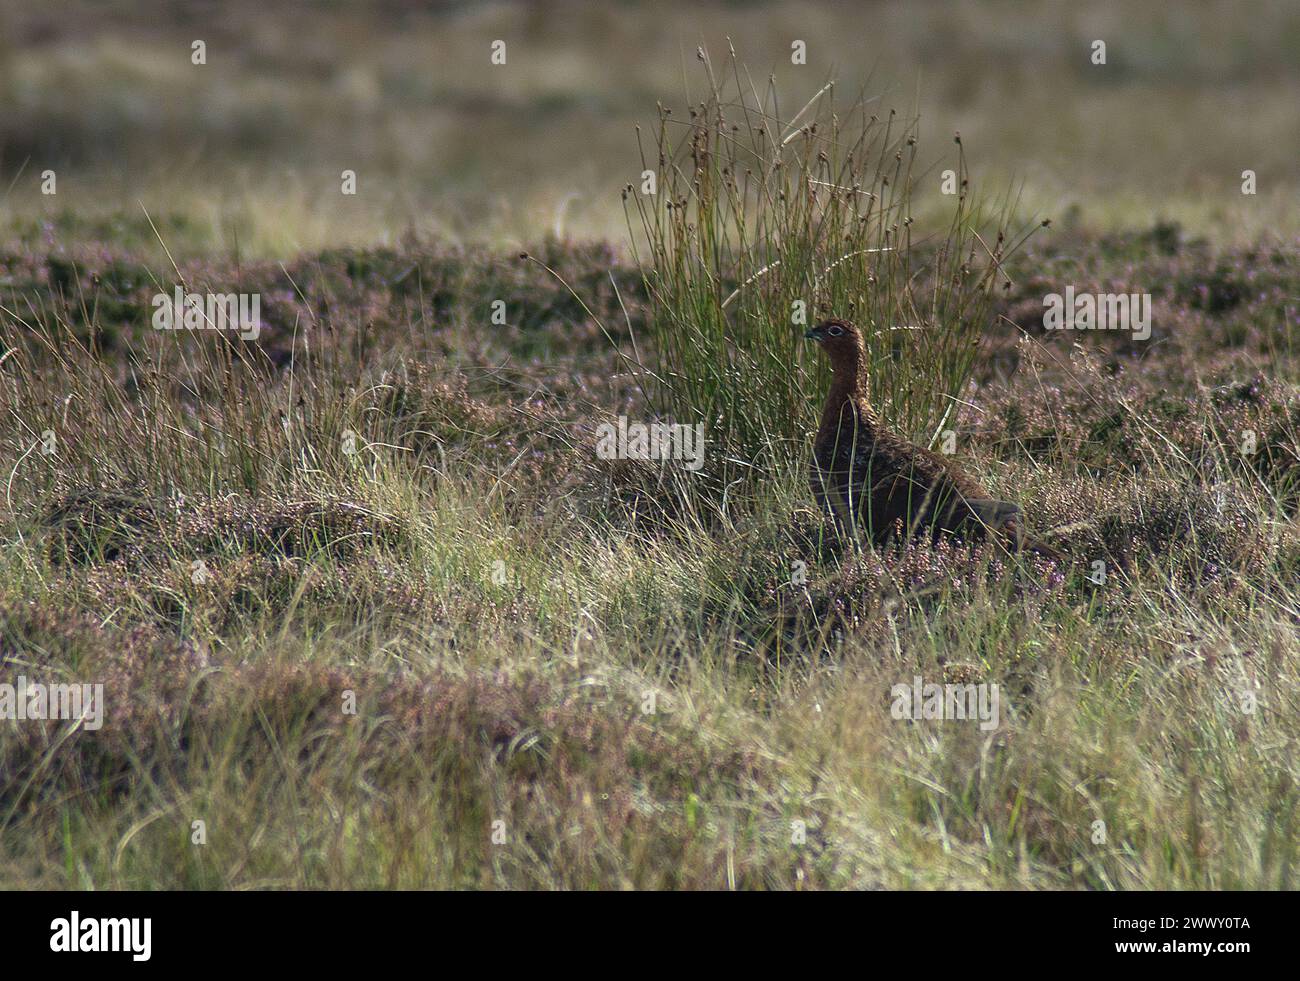 Male Red Grouse among heather and grass highlighted by the sun and looking into the image from the right Stock Photo